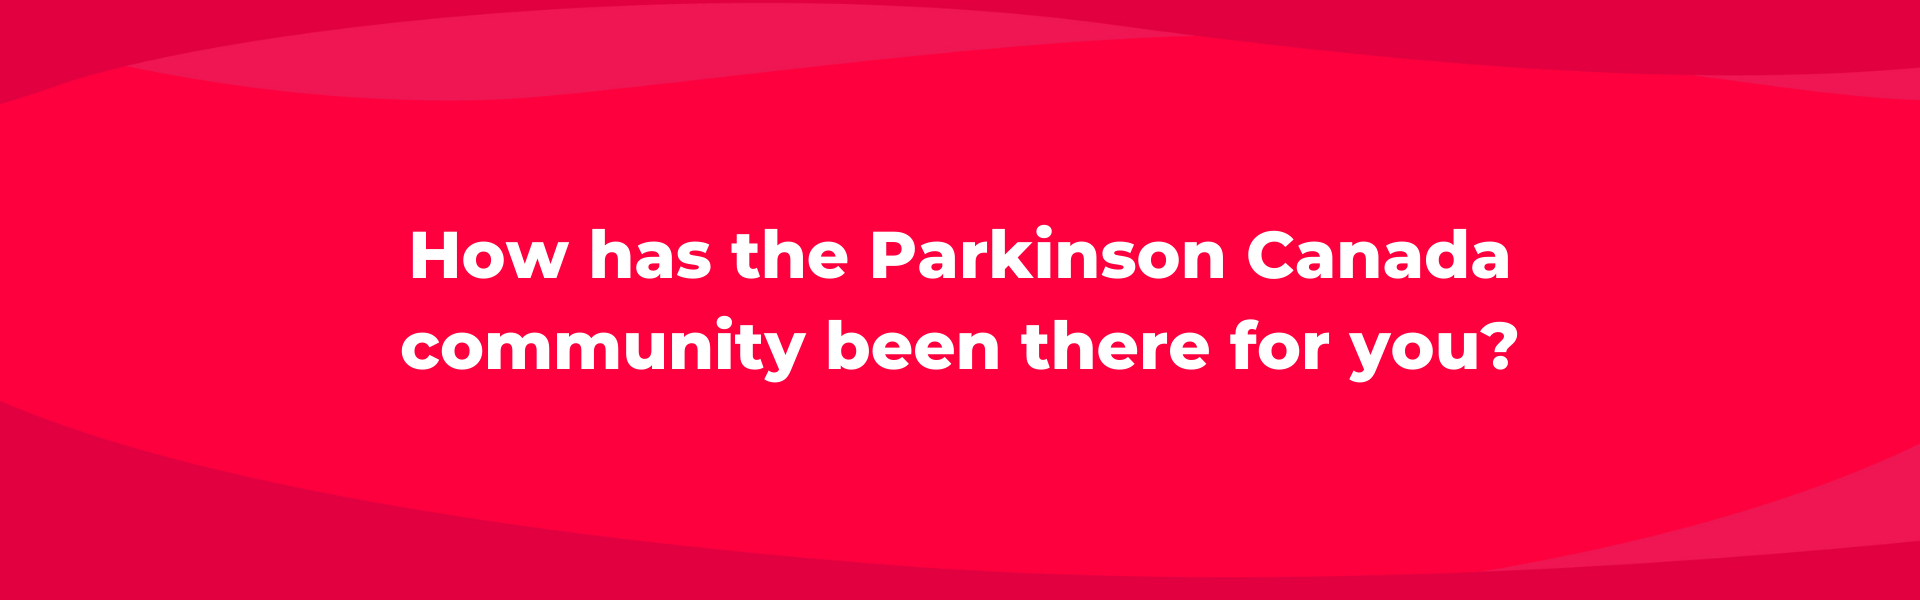 How has the Parkinson Canada community been there for you?